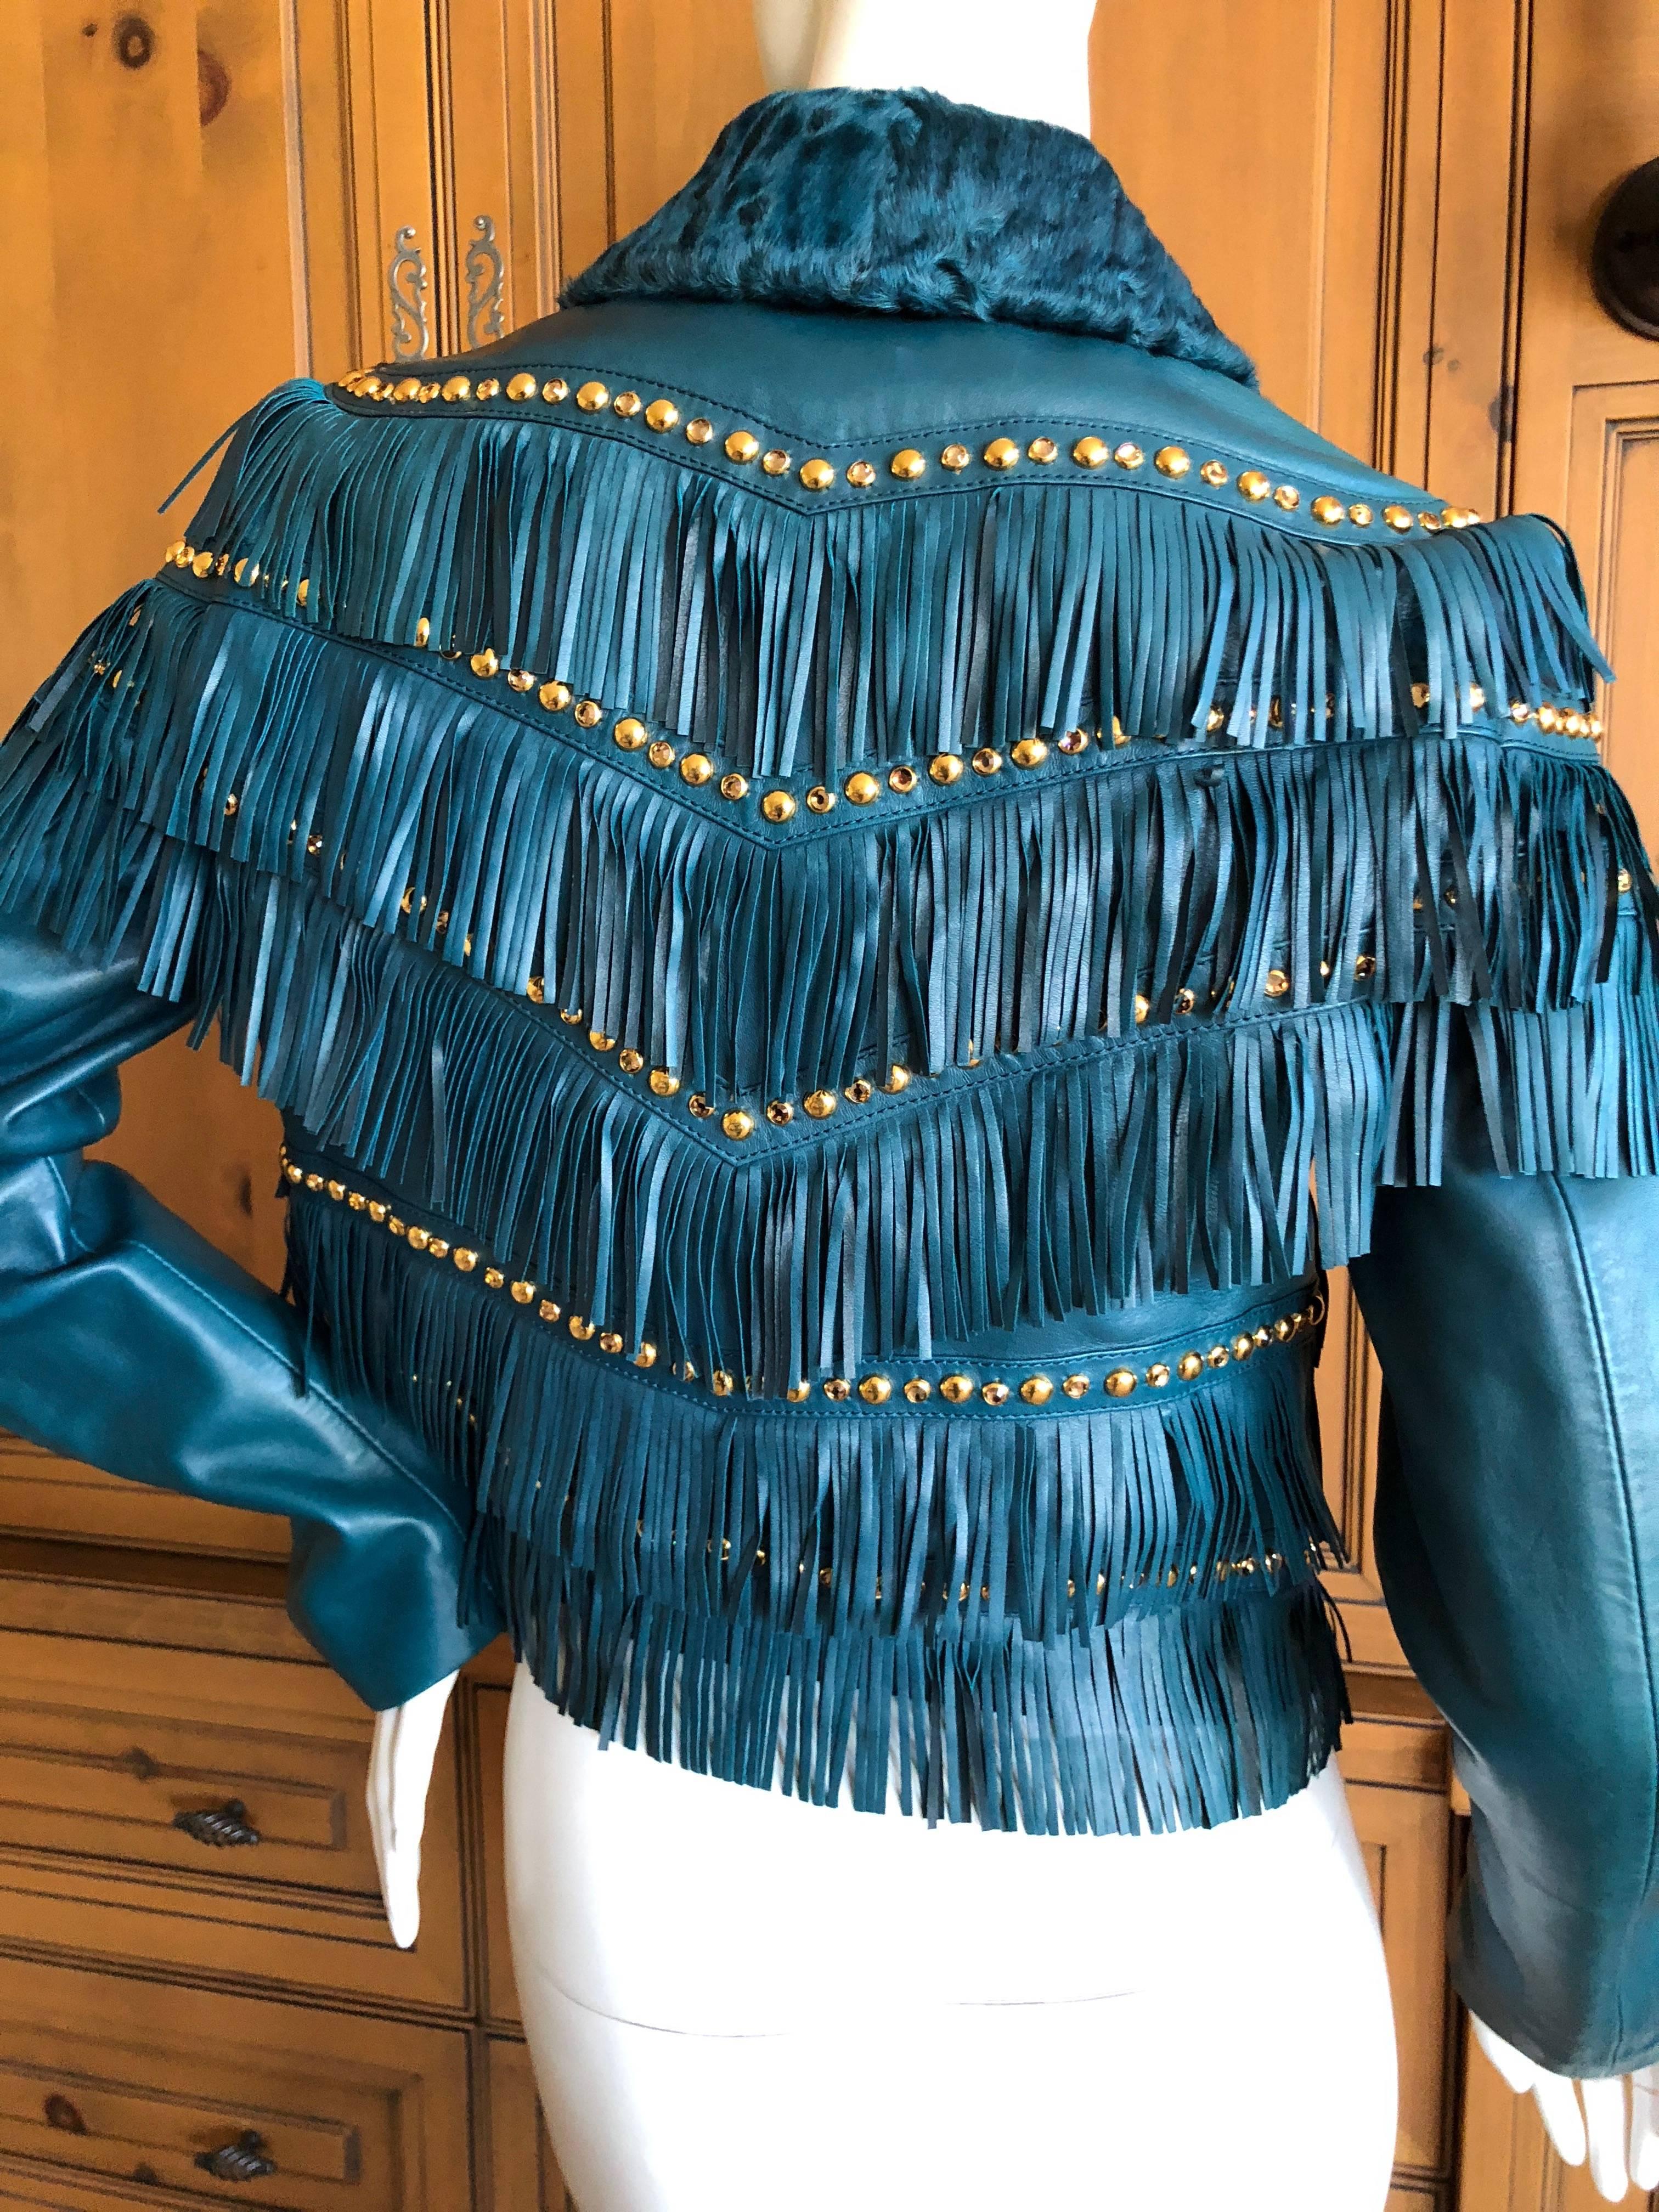 Versace Blue Fringe Stud and Jeweled Lambskin Leather Jacket.
SO beautiful, perfect gift for  the Versace lover.
 NWT $9960
Size 42 
Bust 36" 
Waist 35"
Length 20"
 Excellent new with tags condition
